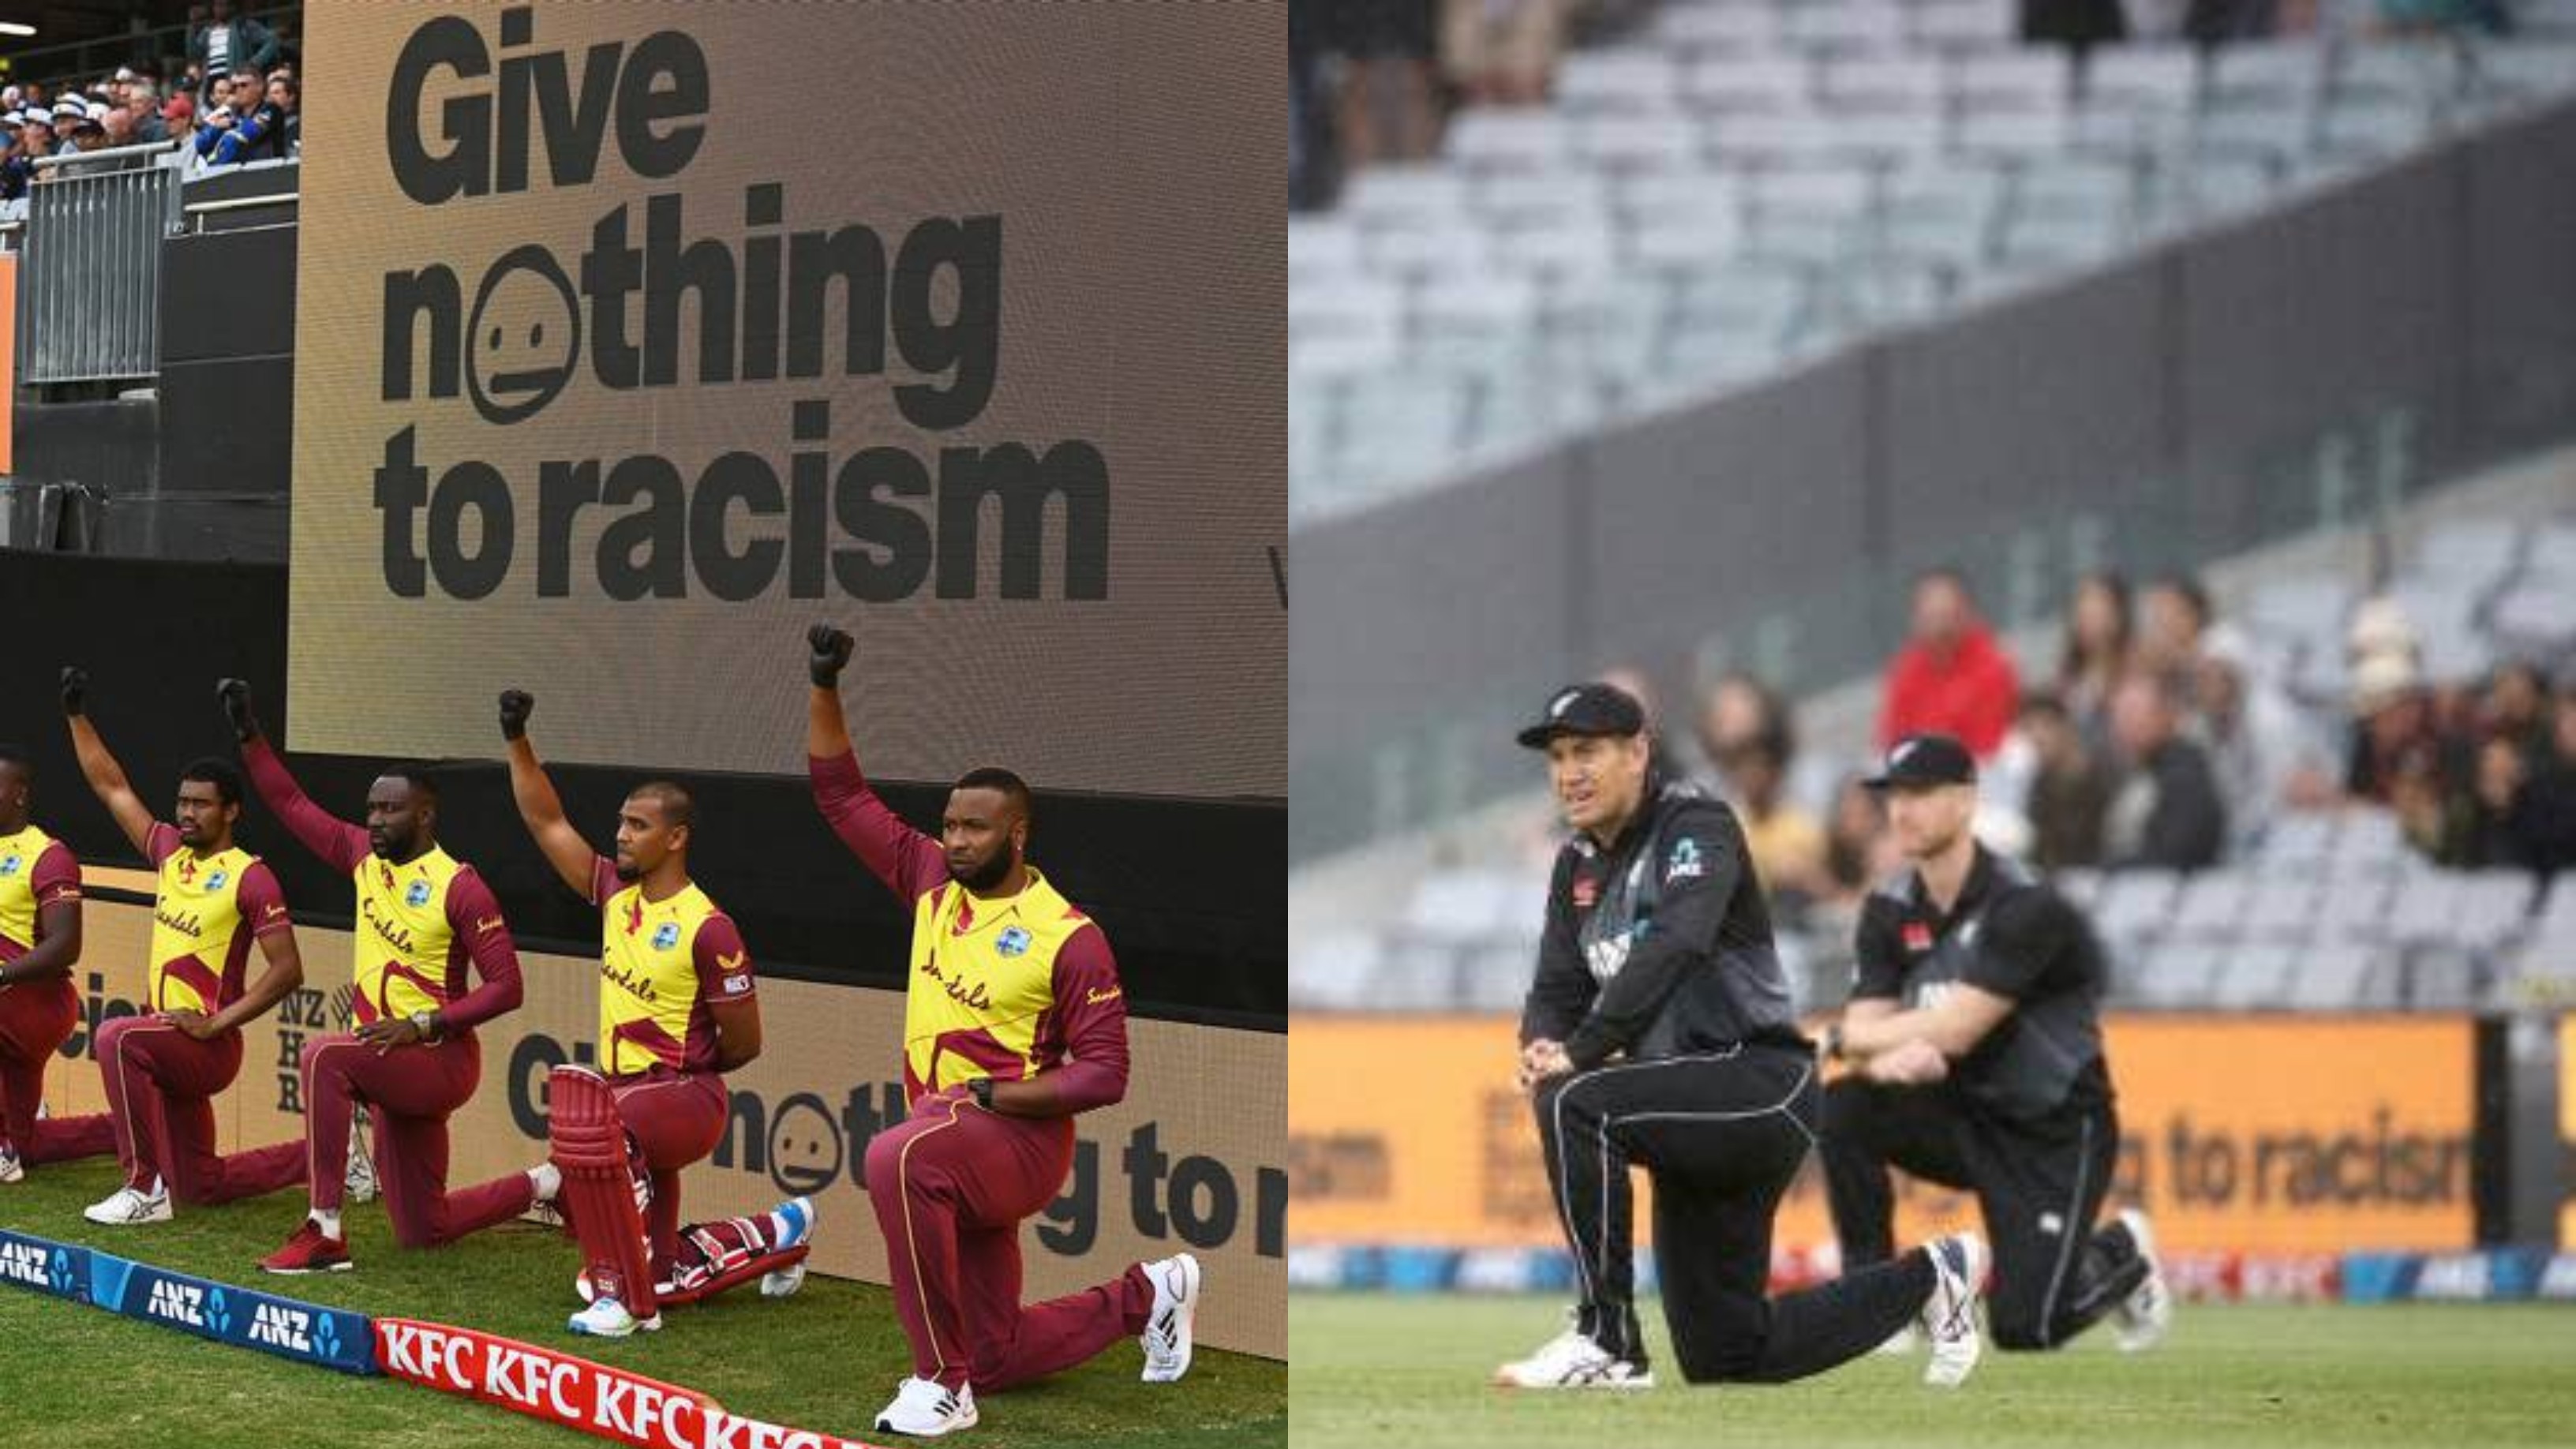 NZ v WI 2020: New Zealand and West Indies players take the knee to support BLM movement